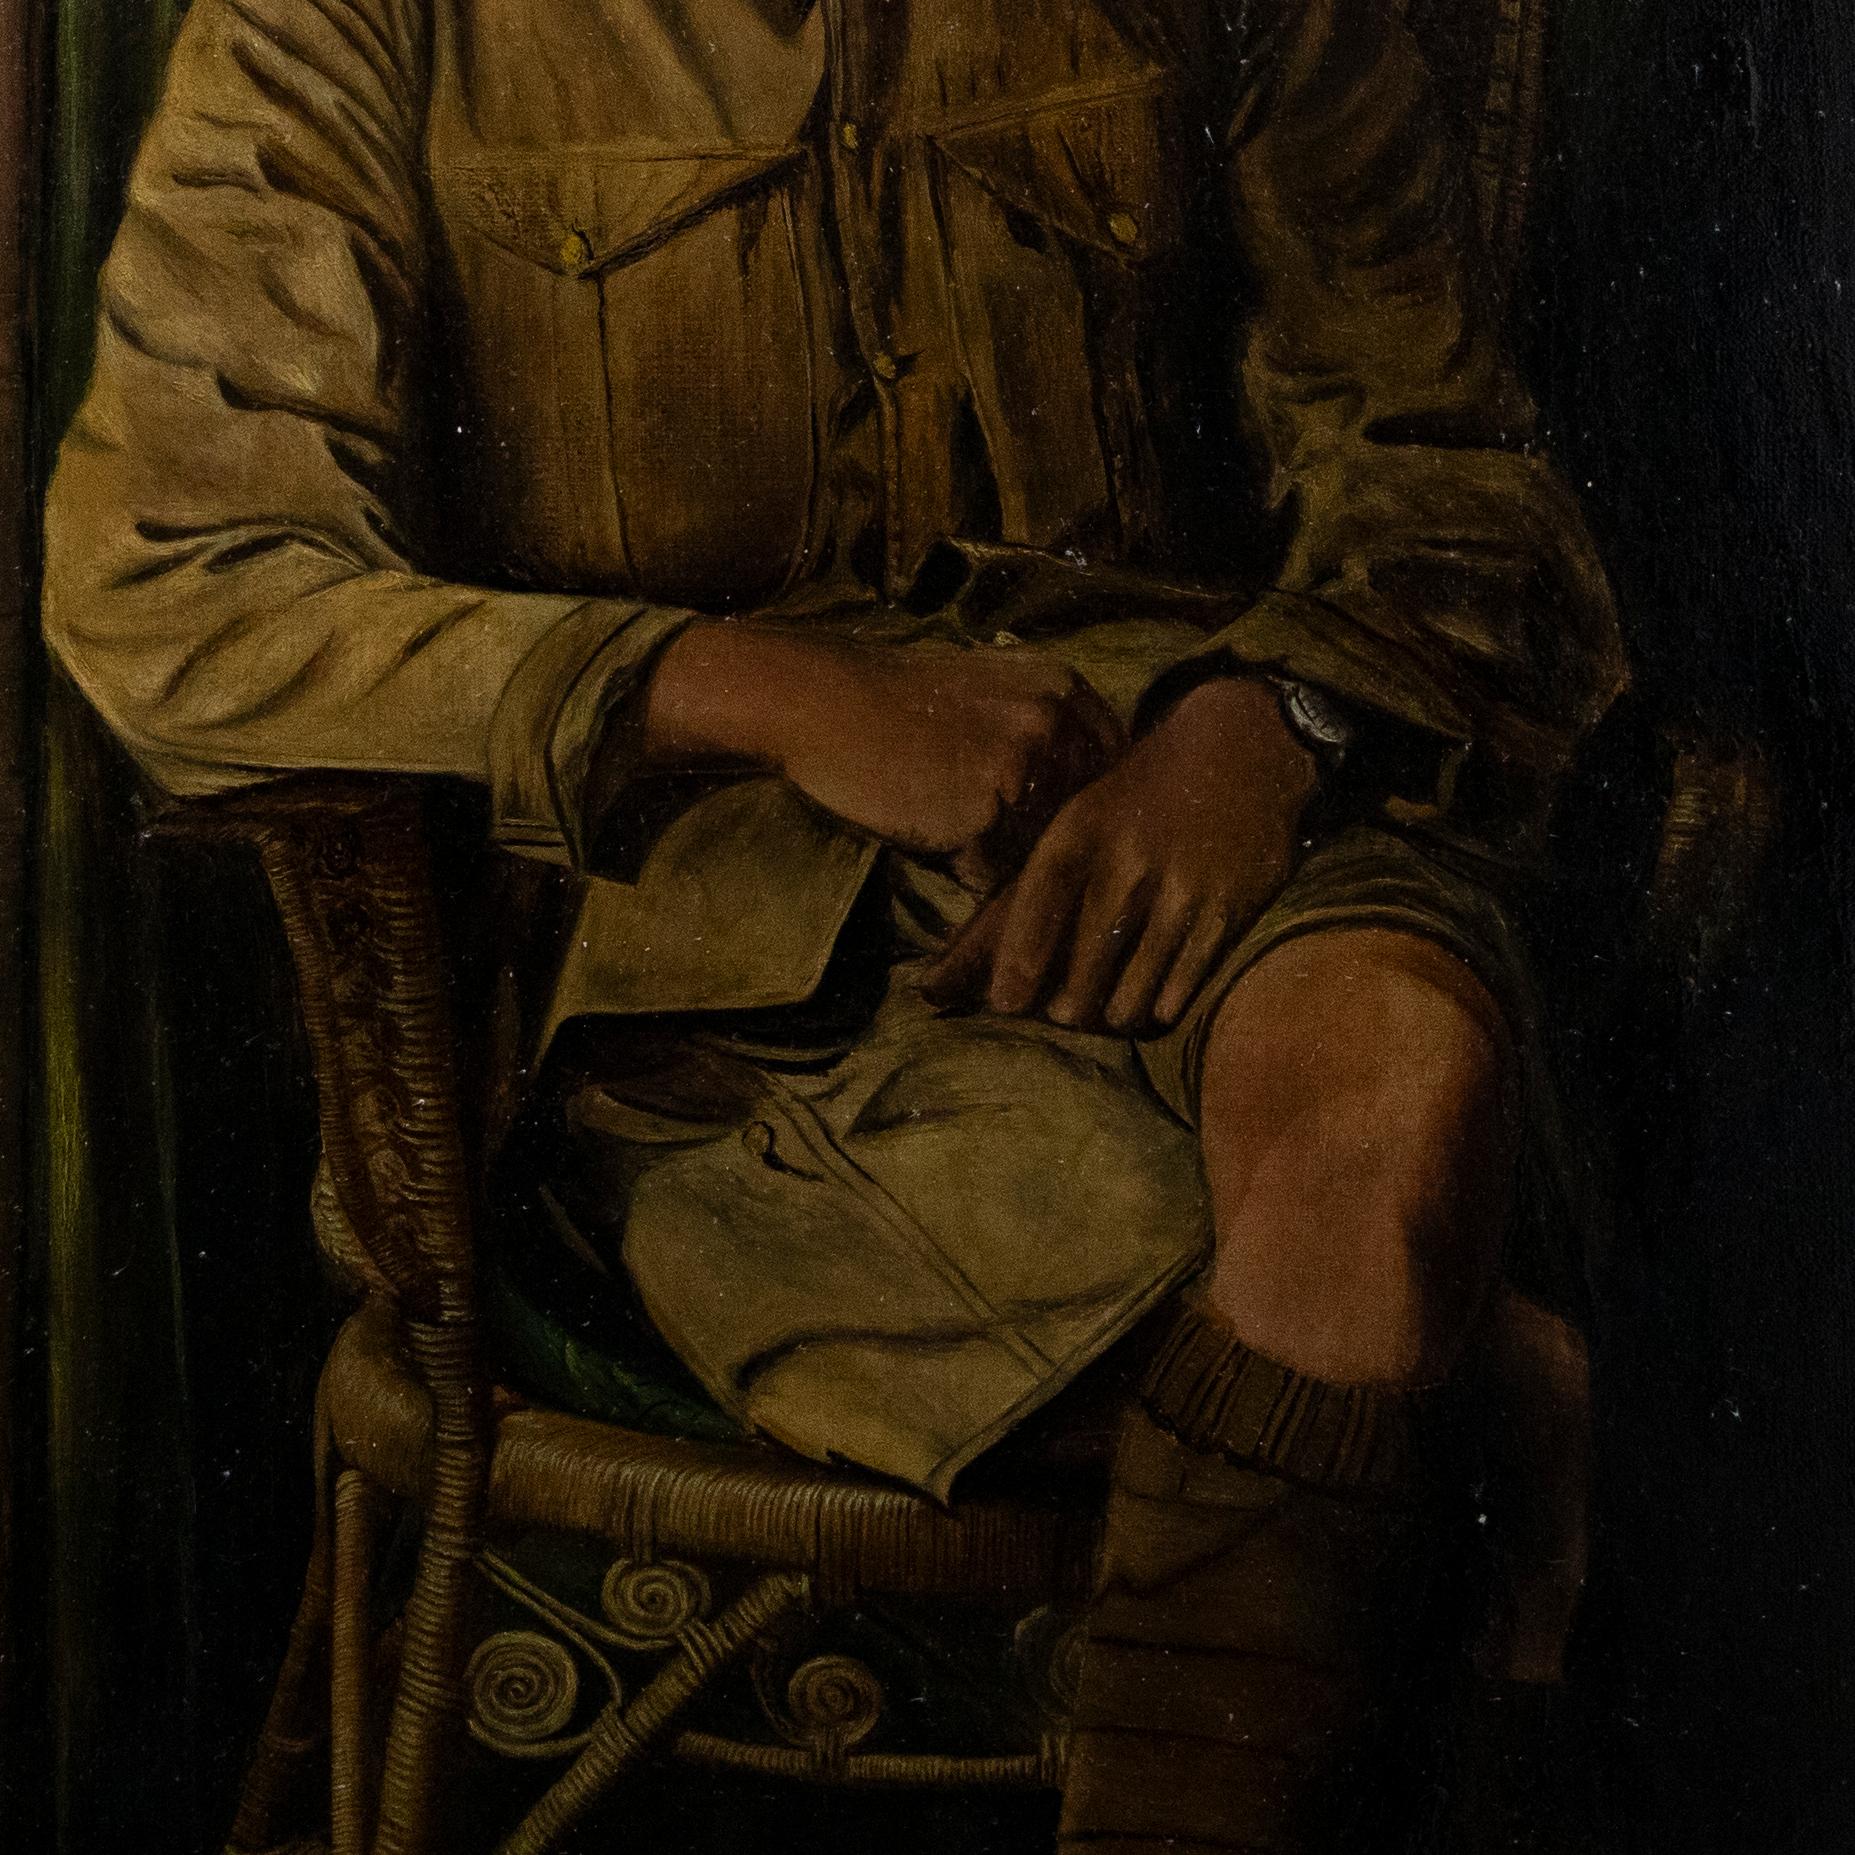 A striking portrait of a British WWI soldier in uniform. The artist has depicted the handsome man, seated in a wicker chair with a green curtain draped to the background. Presented in a substantial gilt-effect frame. Unsigned. On canvas on